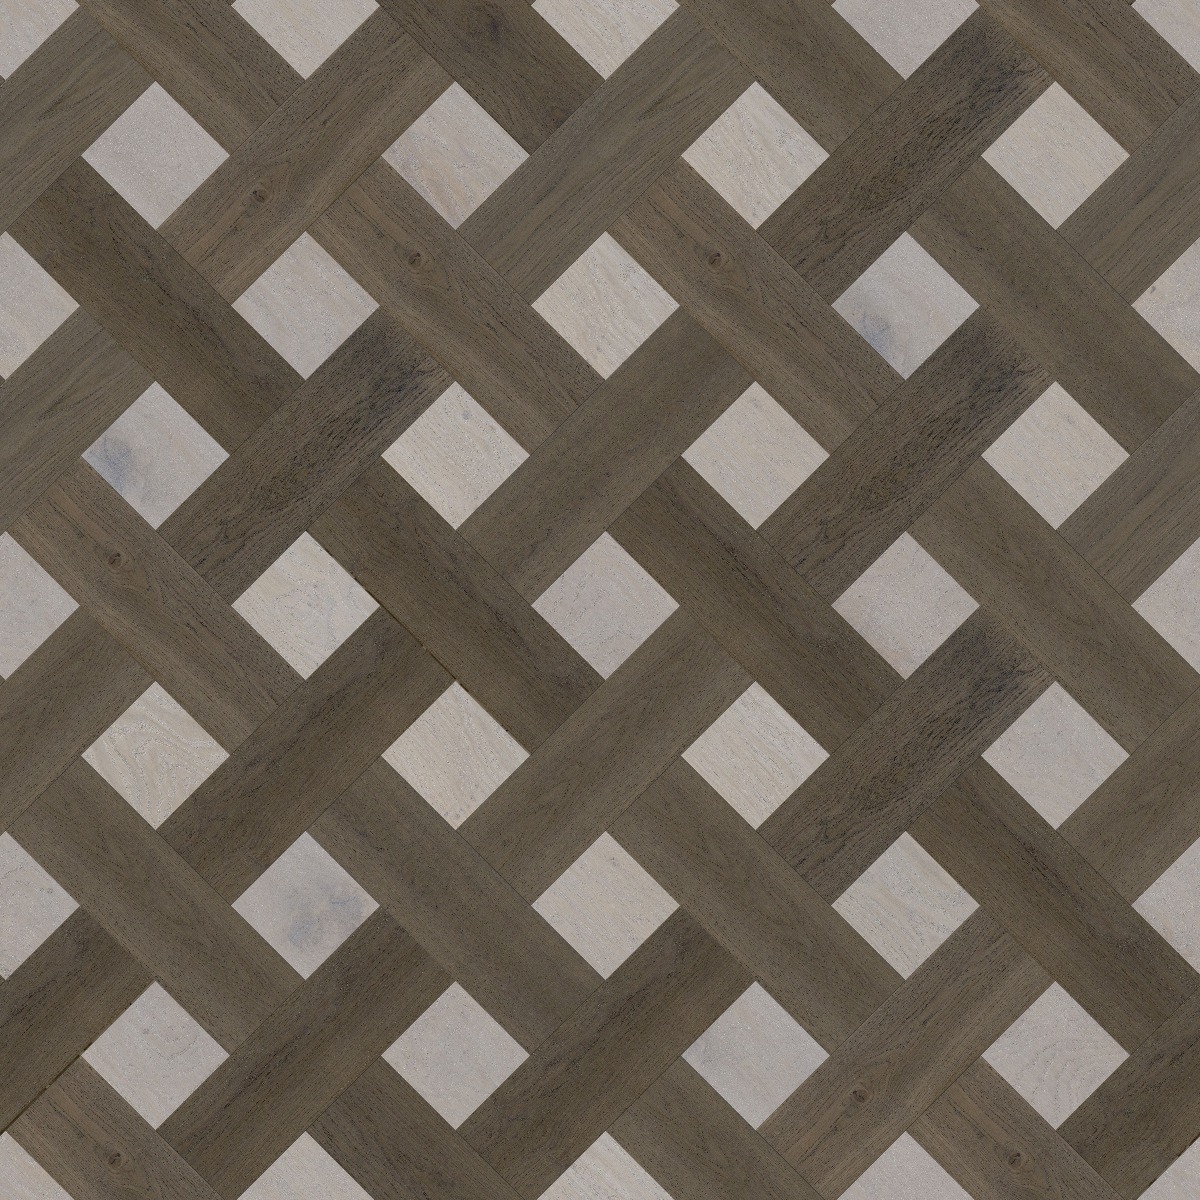 A seamless wood texture with creative oak 4219 boards arranged in a Lattice Weave pattern